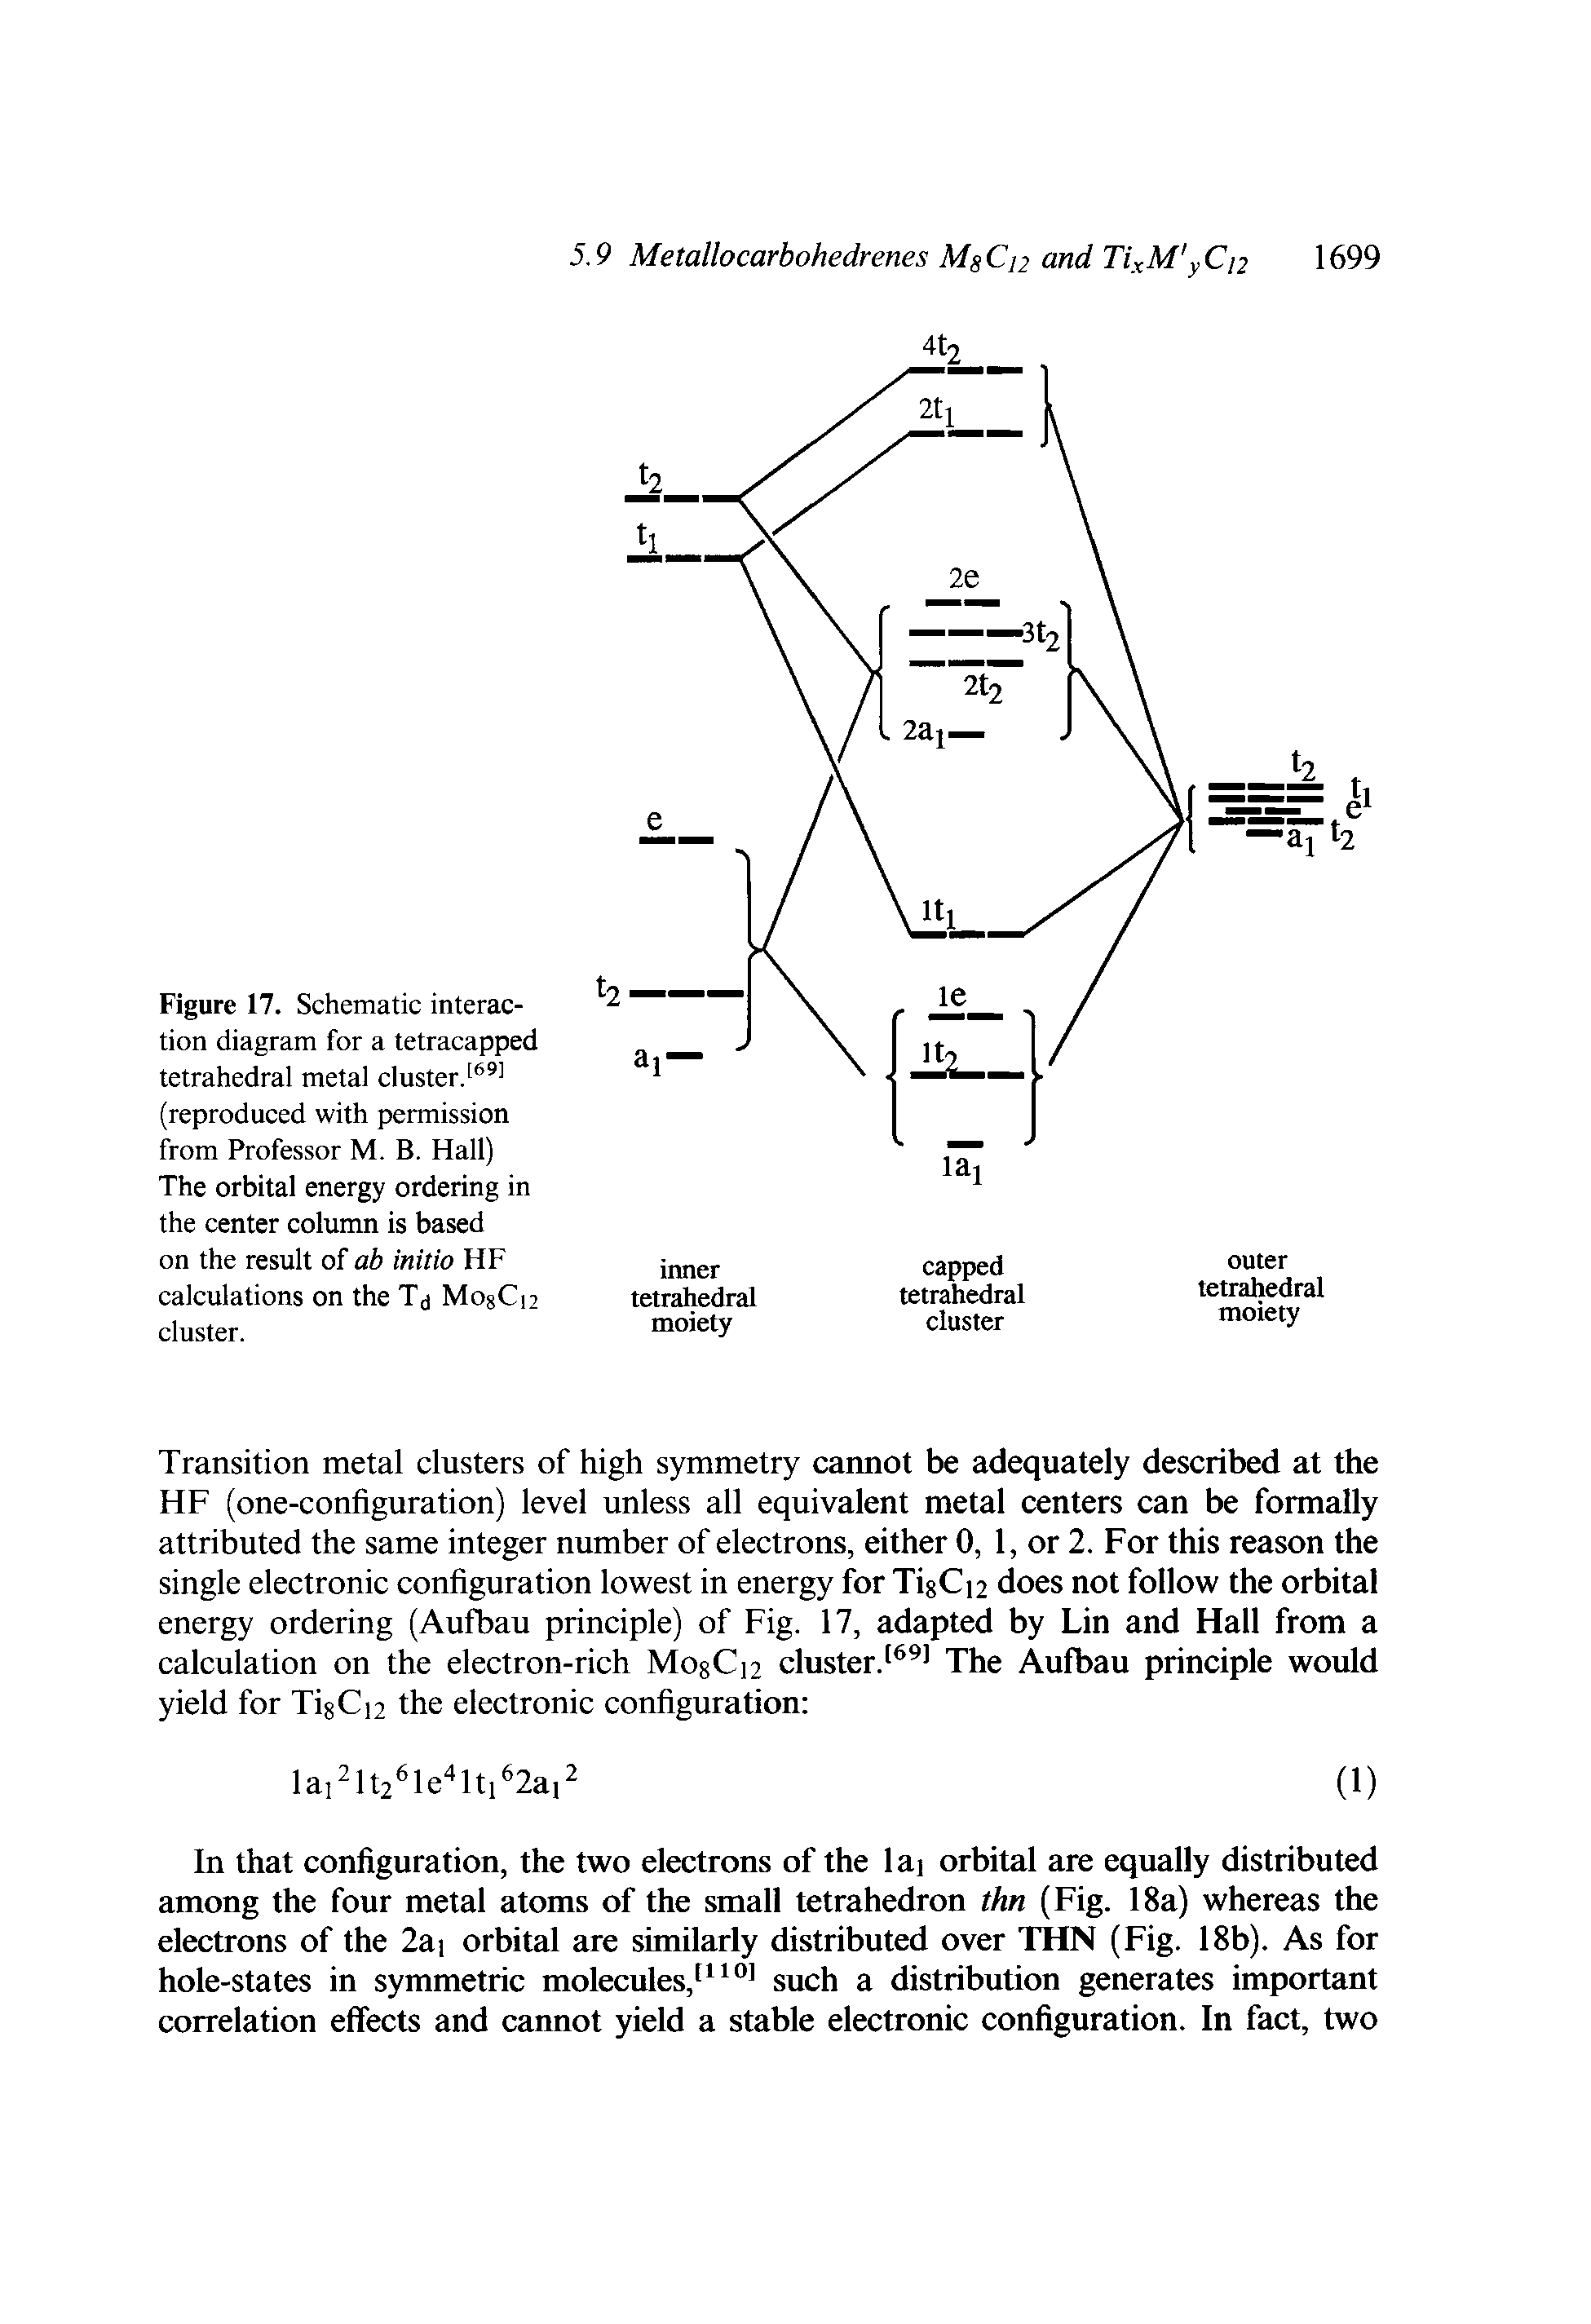 Figure 17. Schematic interaction diagram for a tetracapped tetrahedral metal cluster. (reproduced with permission from Professor M. B. Hall) The orbital energy ordering in the center column is based on the result of ab initio HF calculations on the Tj MojCn cluster.